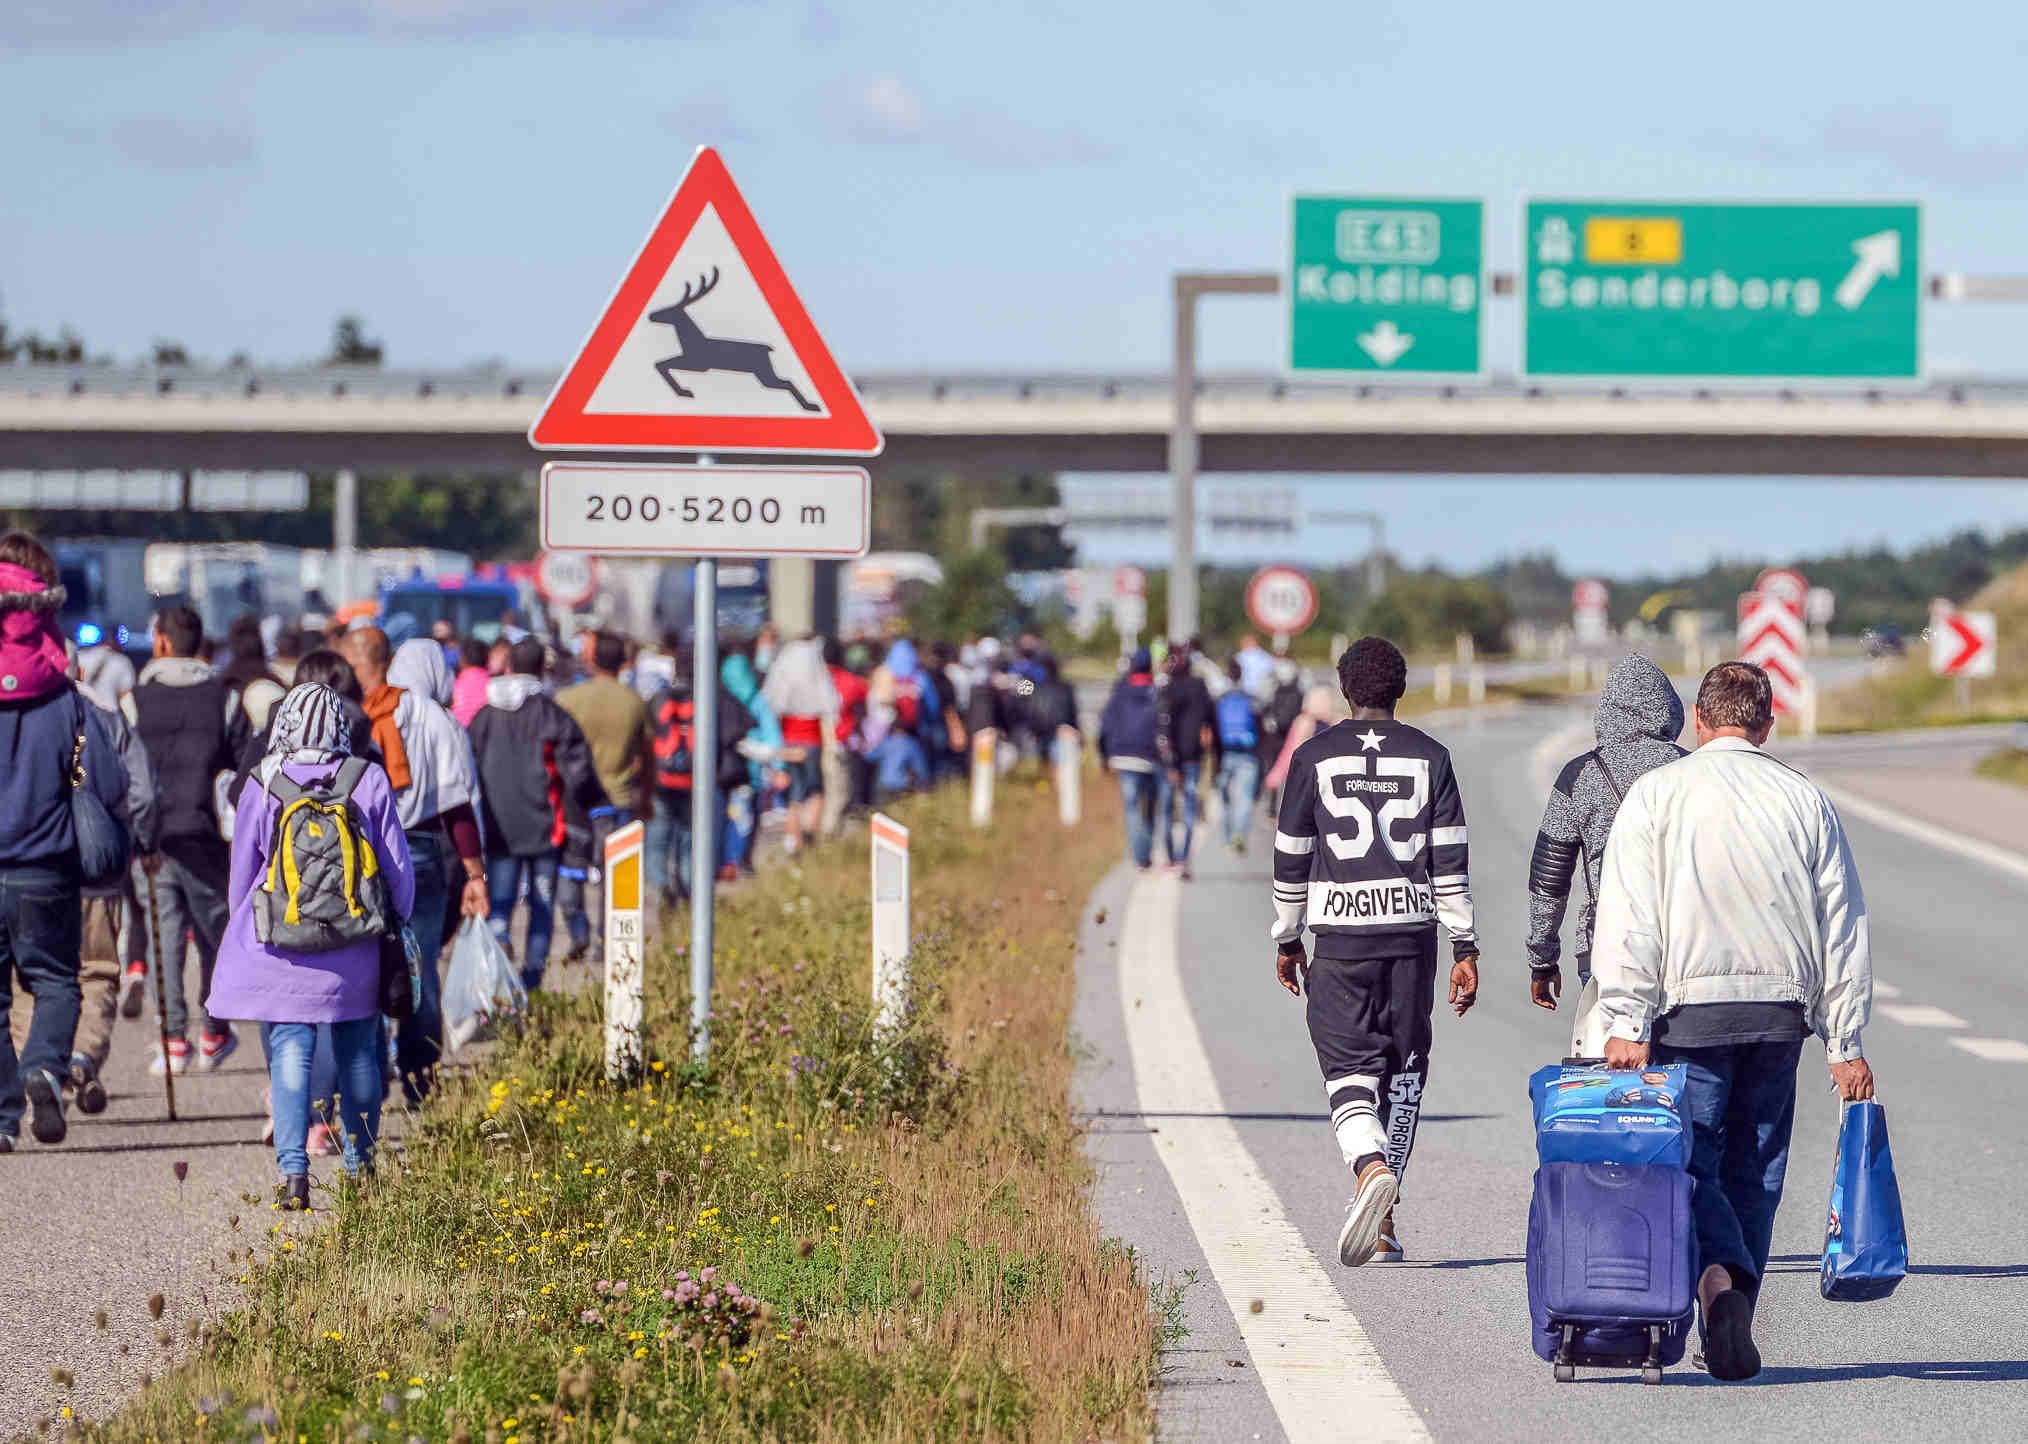 Eastern European countries reject migrant quotas